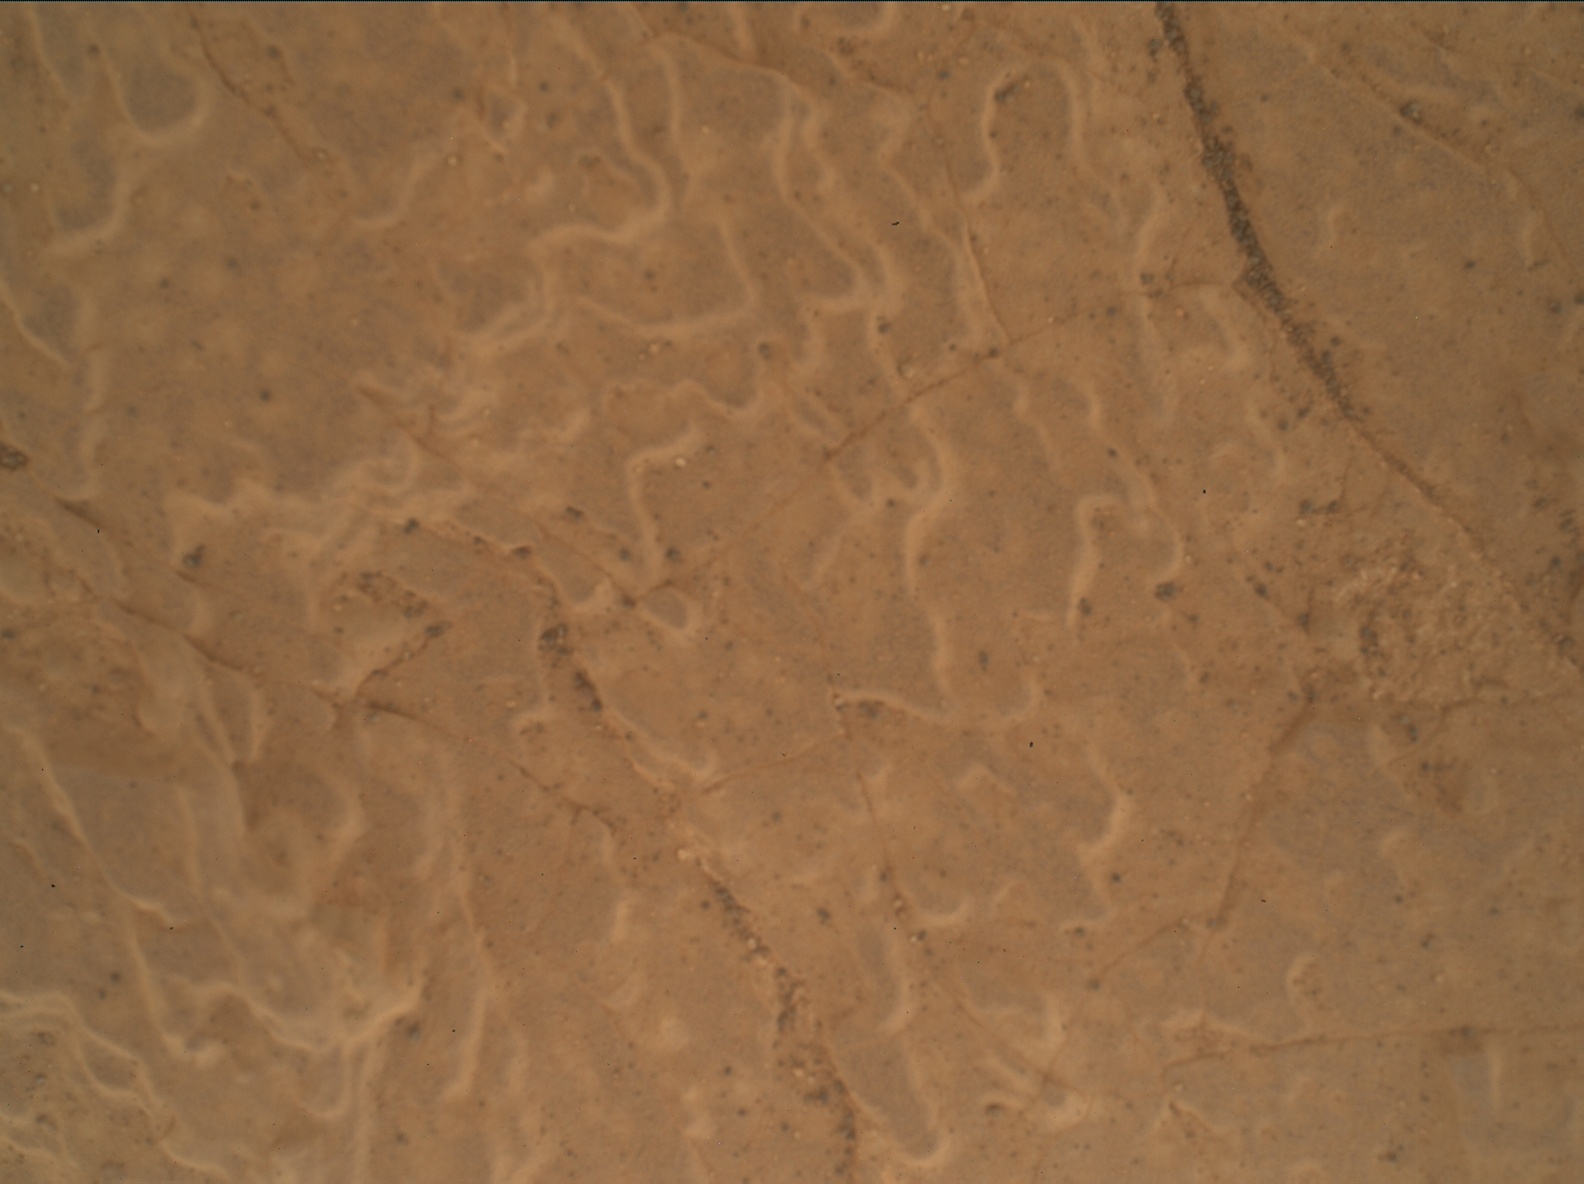 Nasa's Mars rover Curiosity acquired this image using its Mars Hand Lens Imager (MAHLI) on Sol 3042